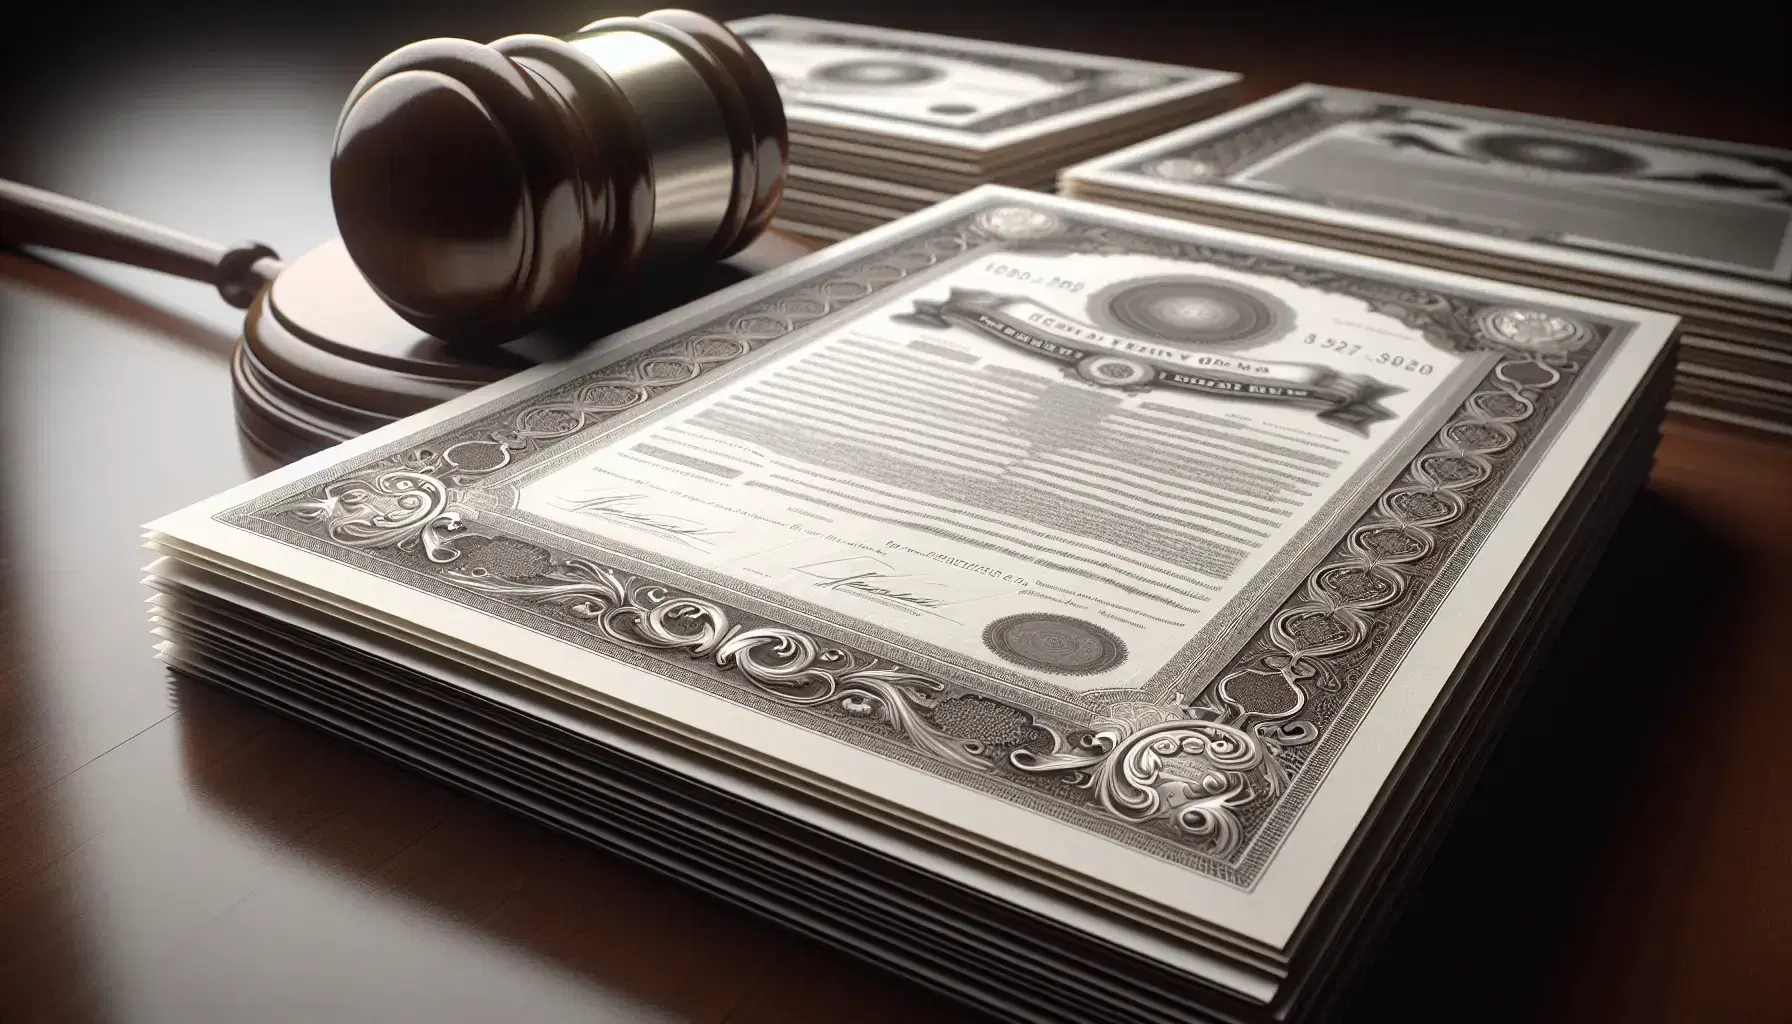 Stacked treasury bonds with intricate silver scrollwork on a desk, a gavel in the soft-focus background, conveying a financial or auction setting.